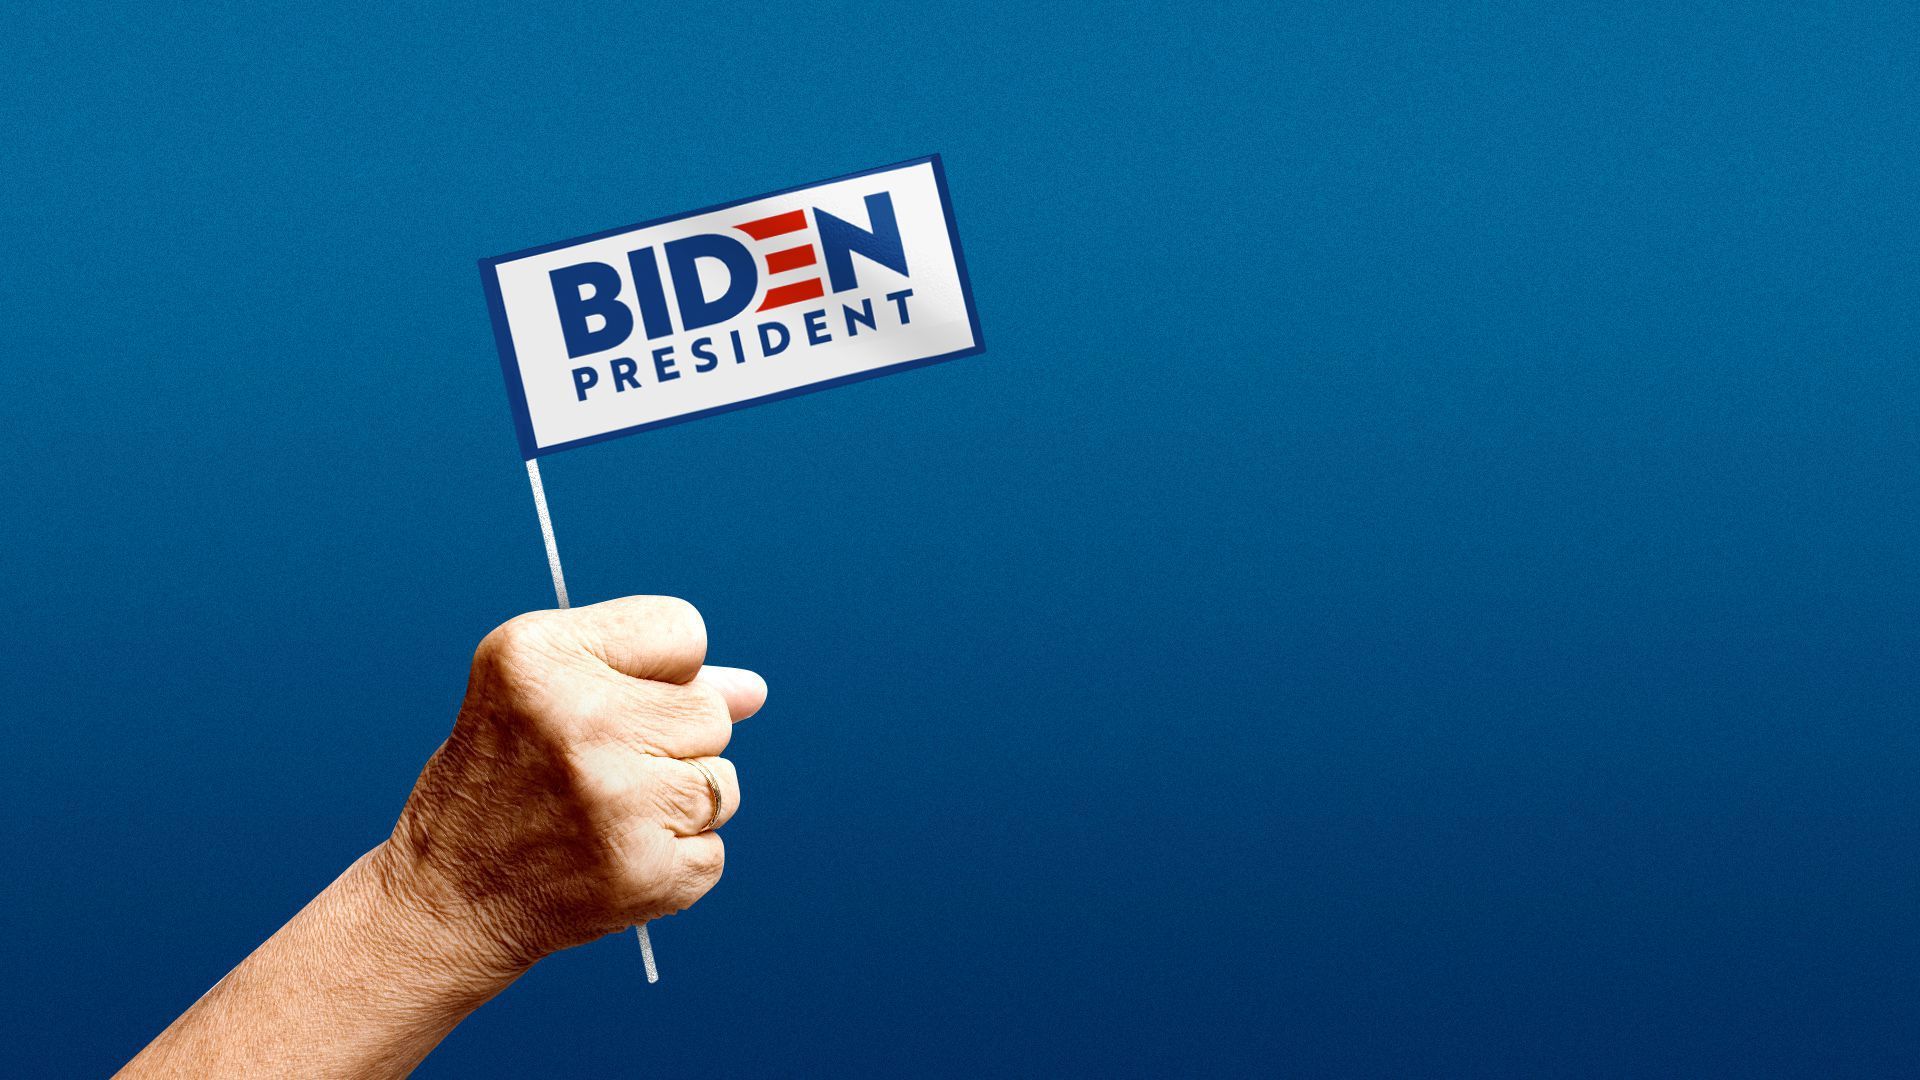 What's driving Biden's strength with seniors